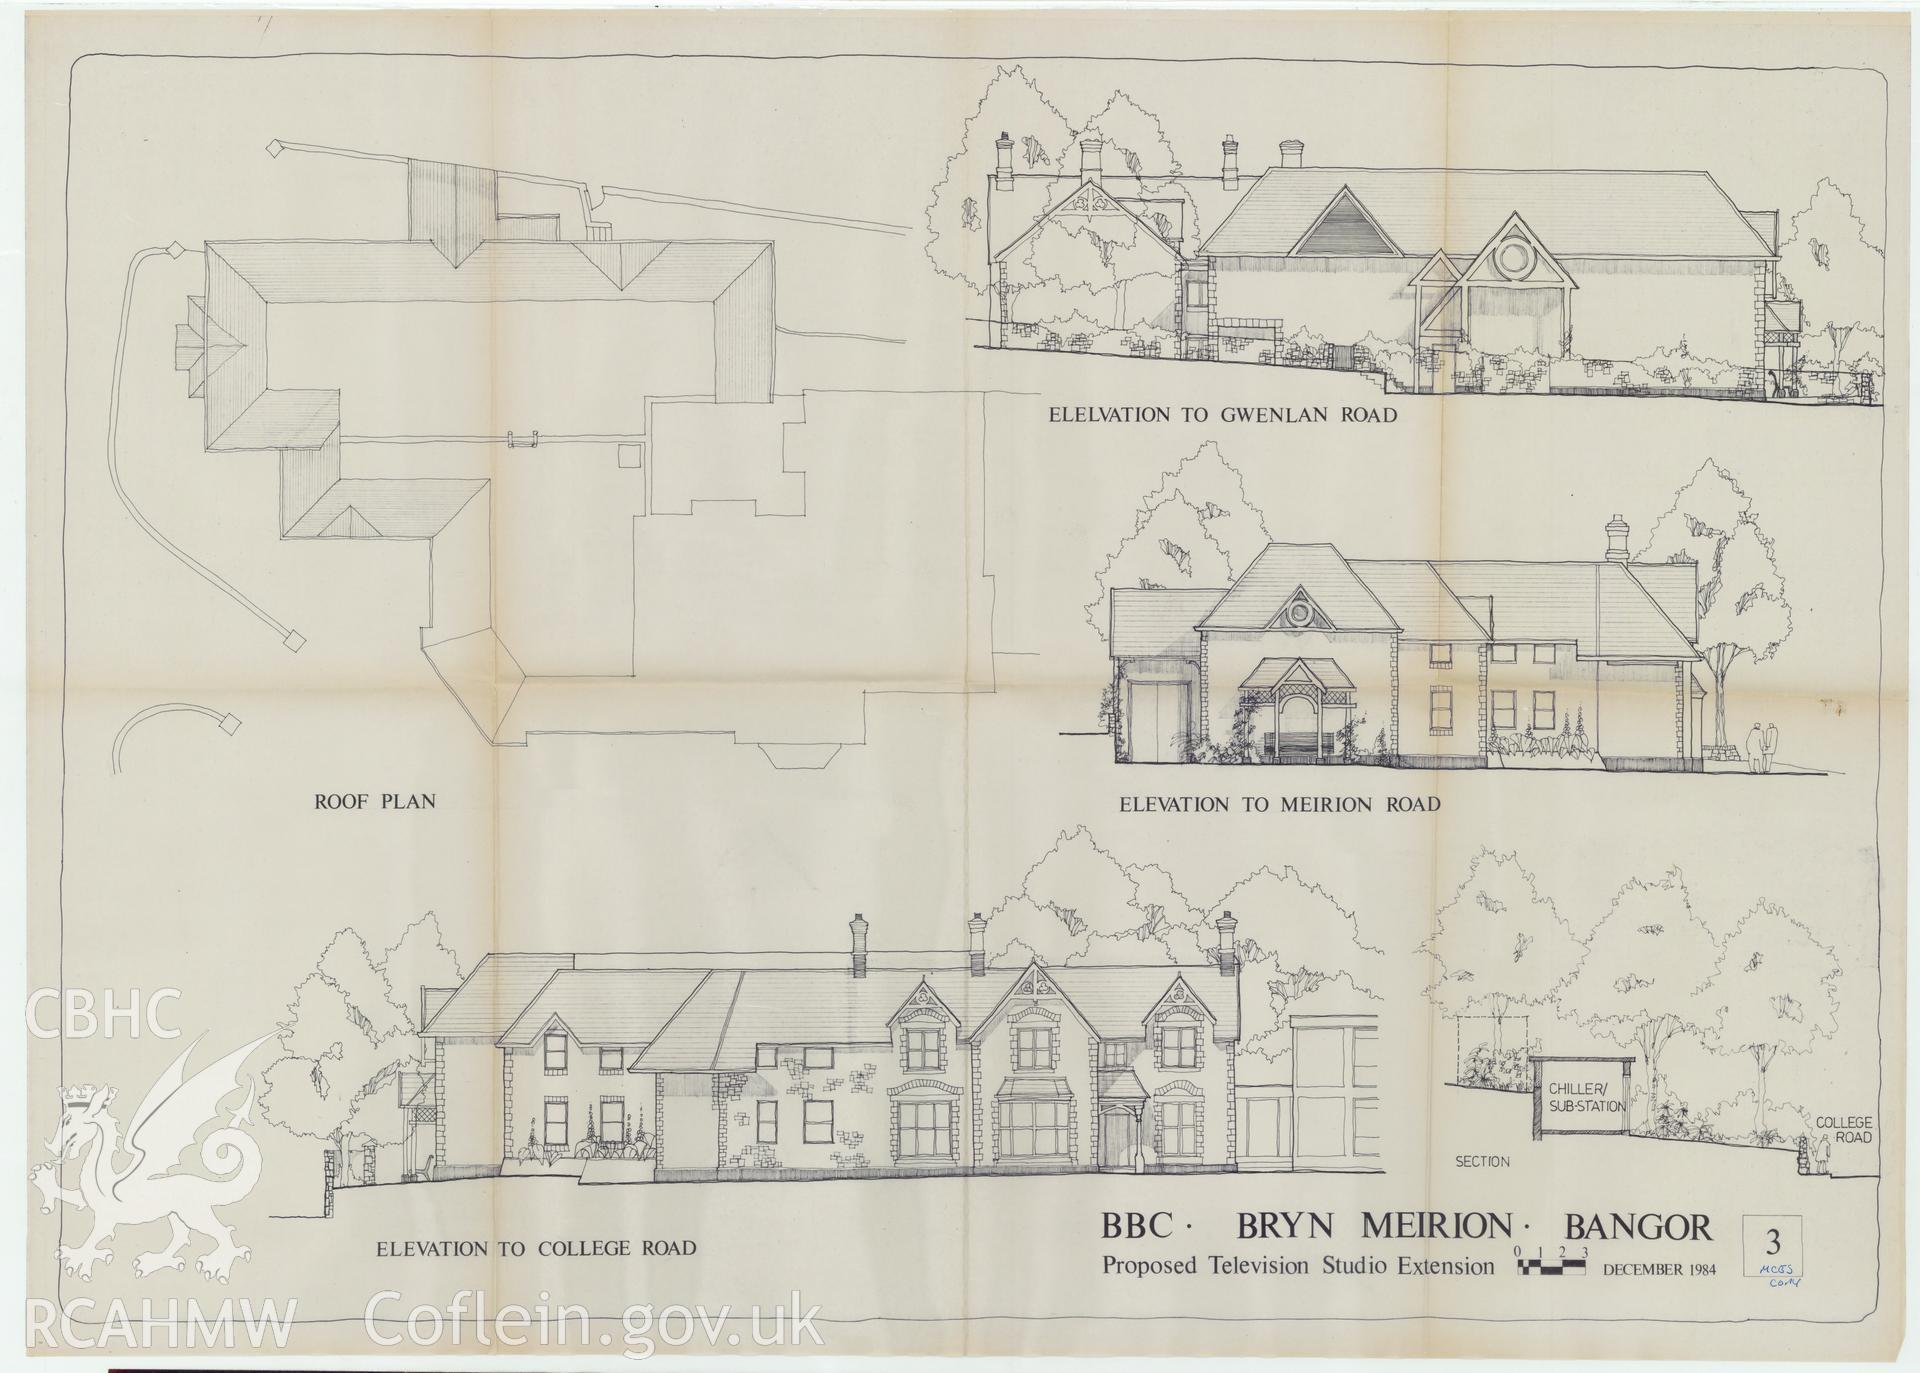 BBC premises, Bryn Meirion, Bangor - drawing of elevation and roof plan of proposed TV studio extension. Drawing No. 3. December 1984.